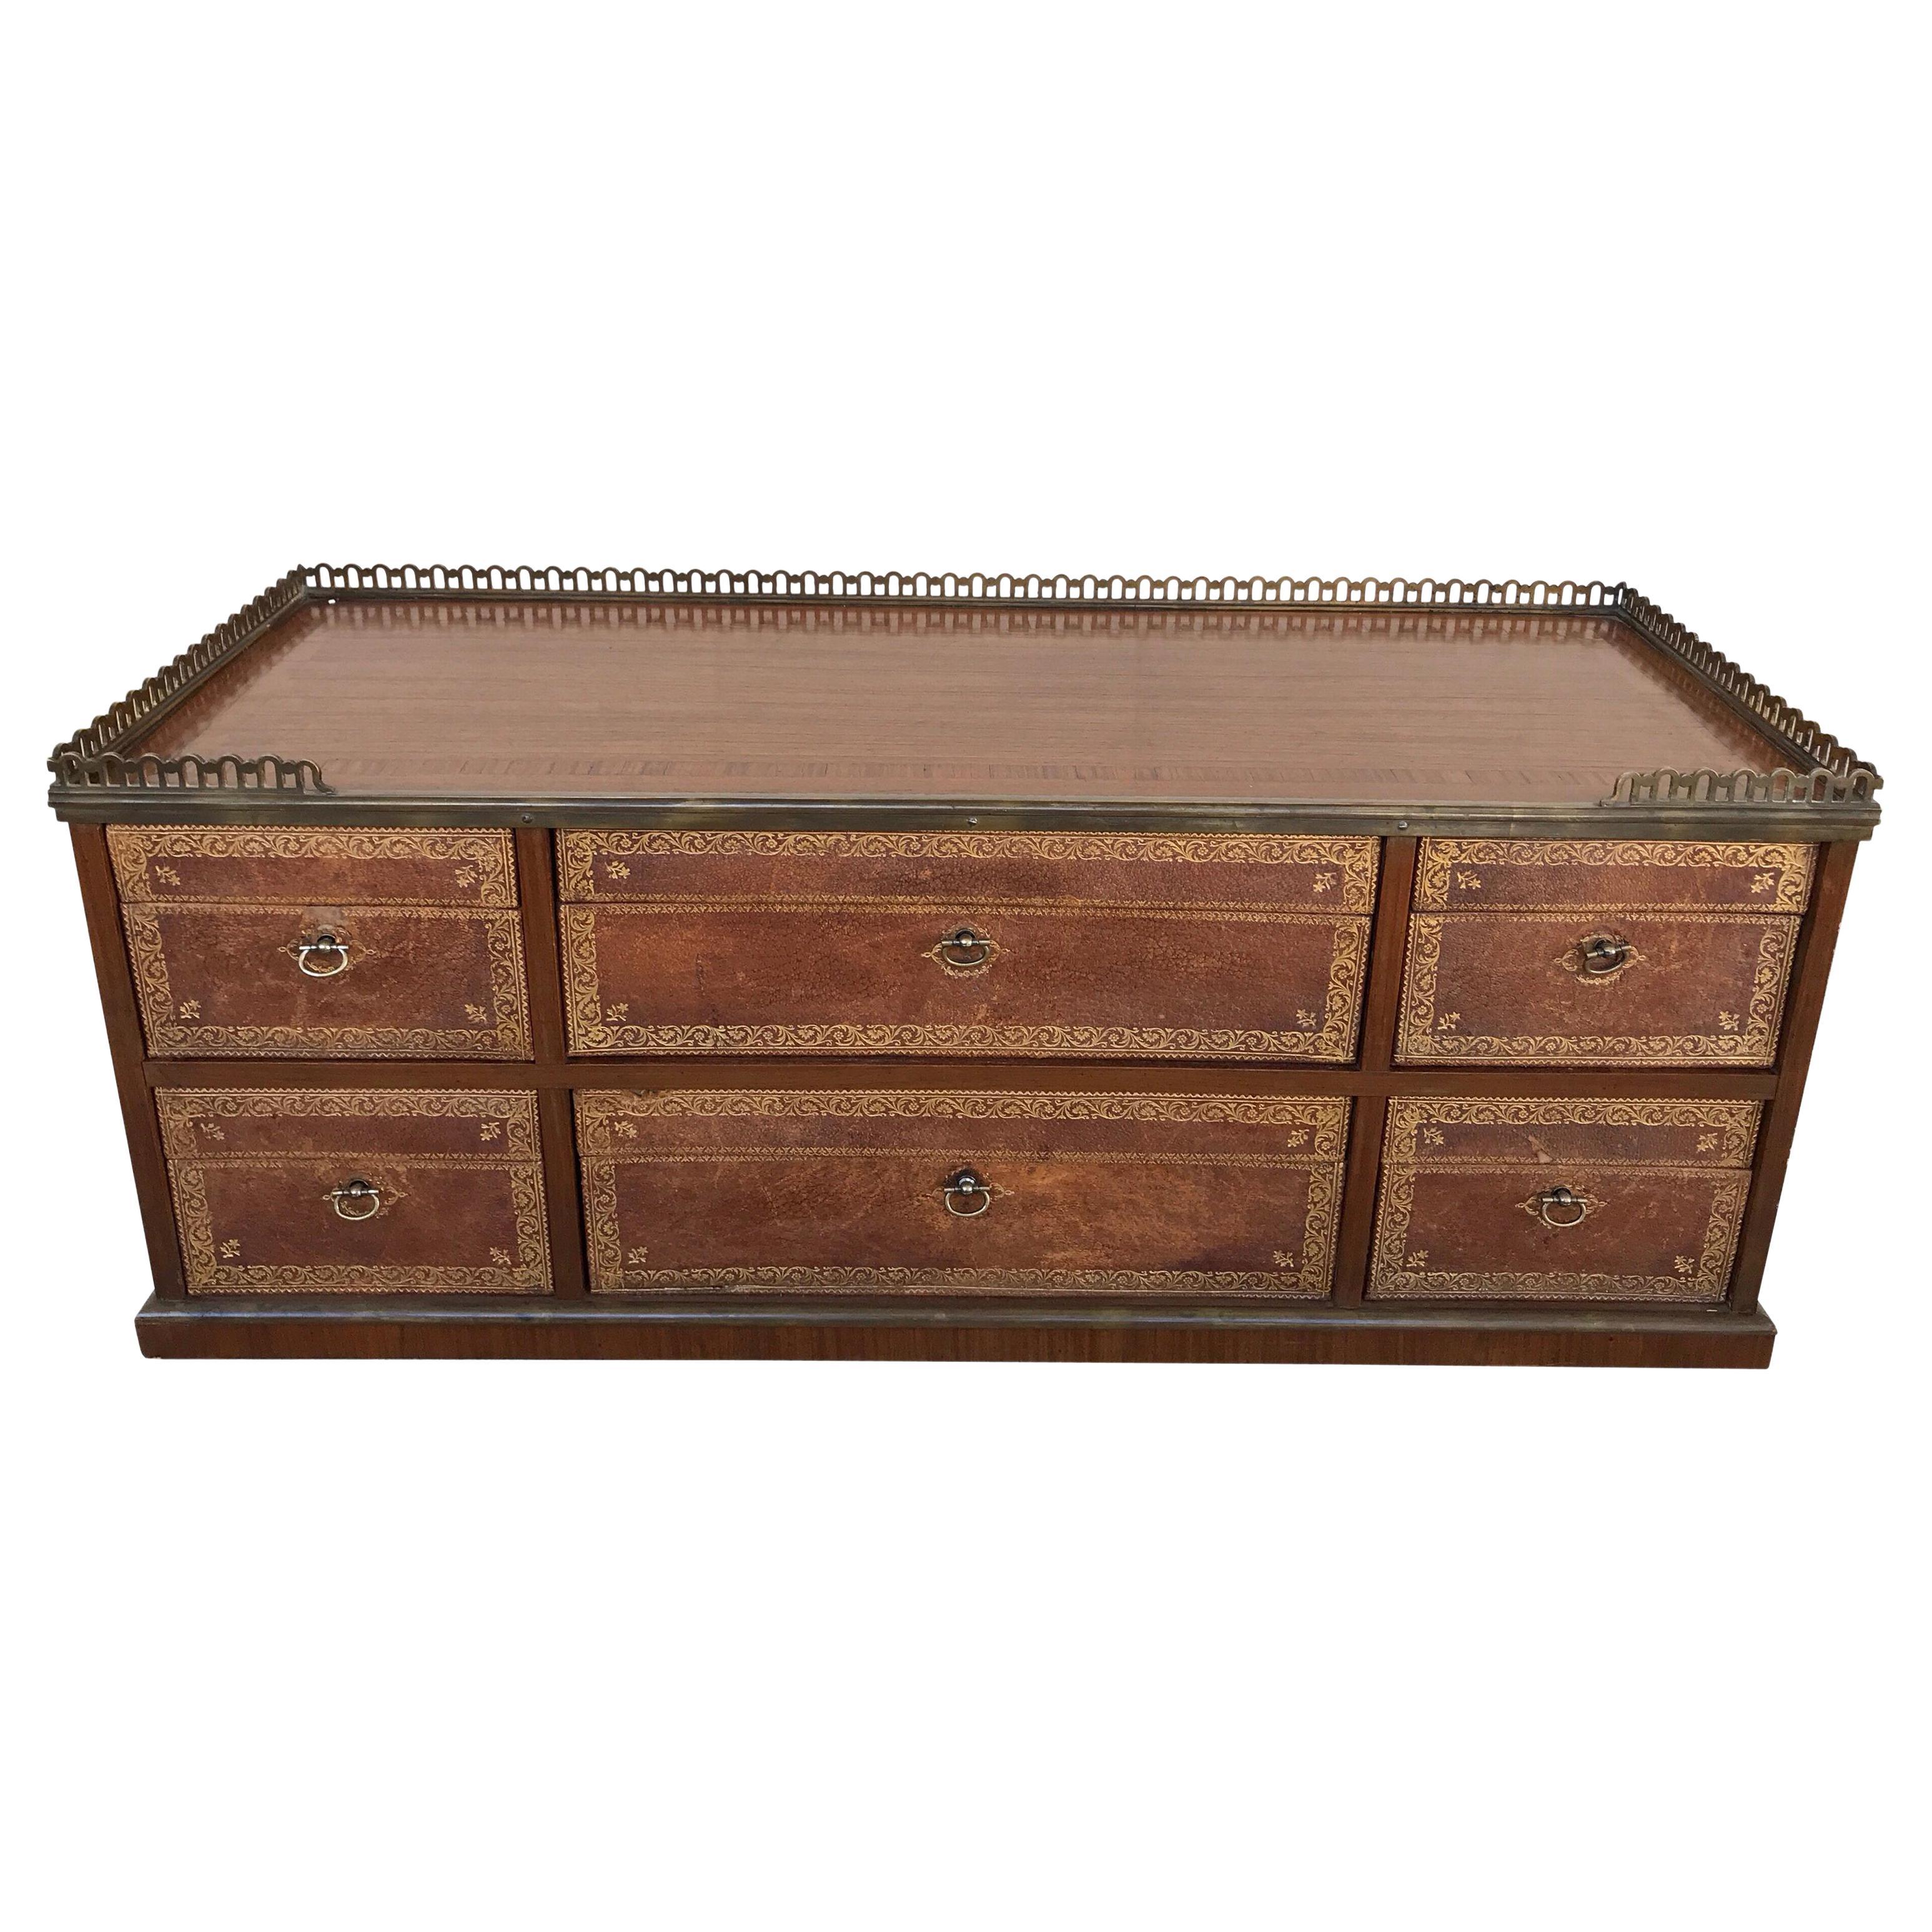 French Bronze and Leather Desk Cartioner